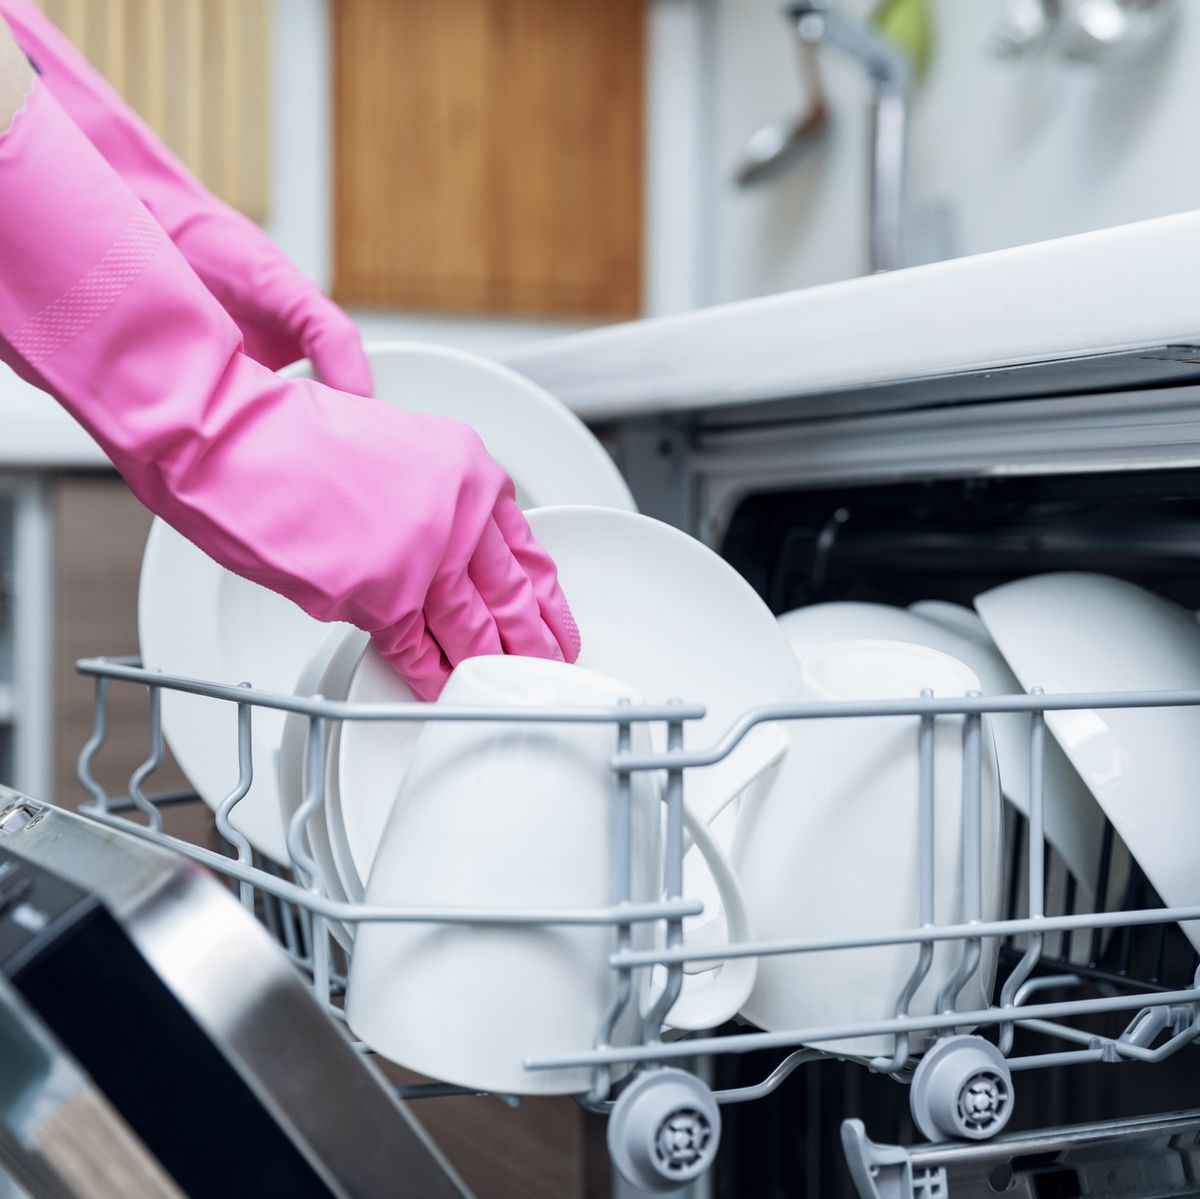 How to Clean a Dishwasher (Quickly!)